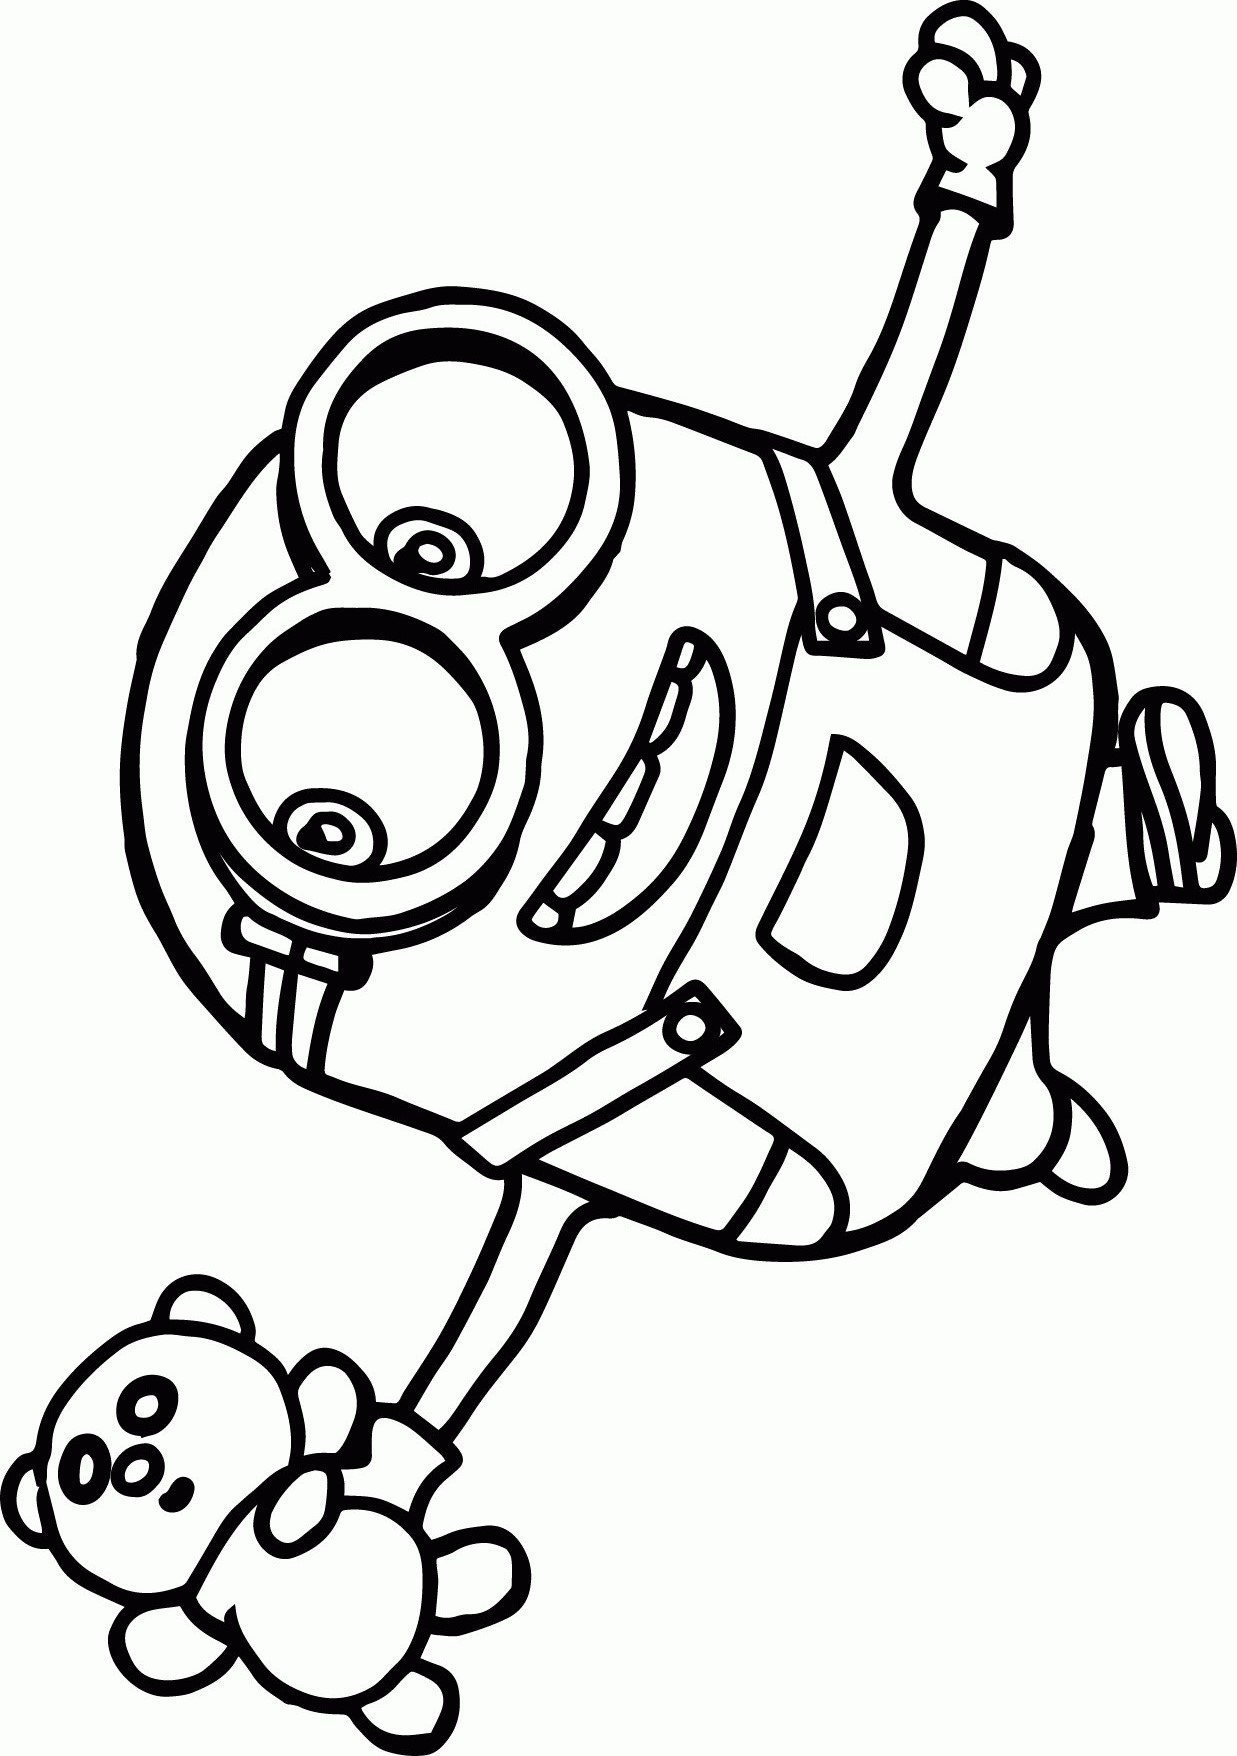 minion bob with teddy coloring page free printable coloring pages for